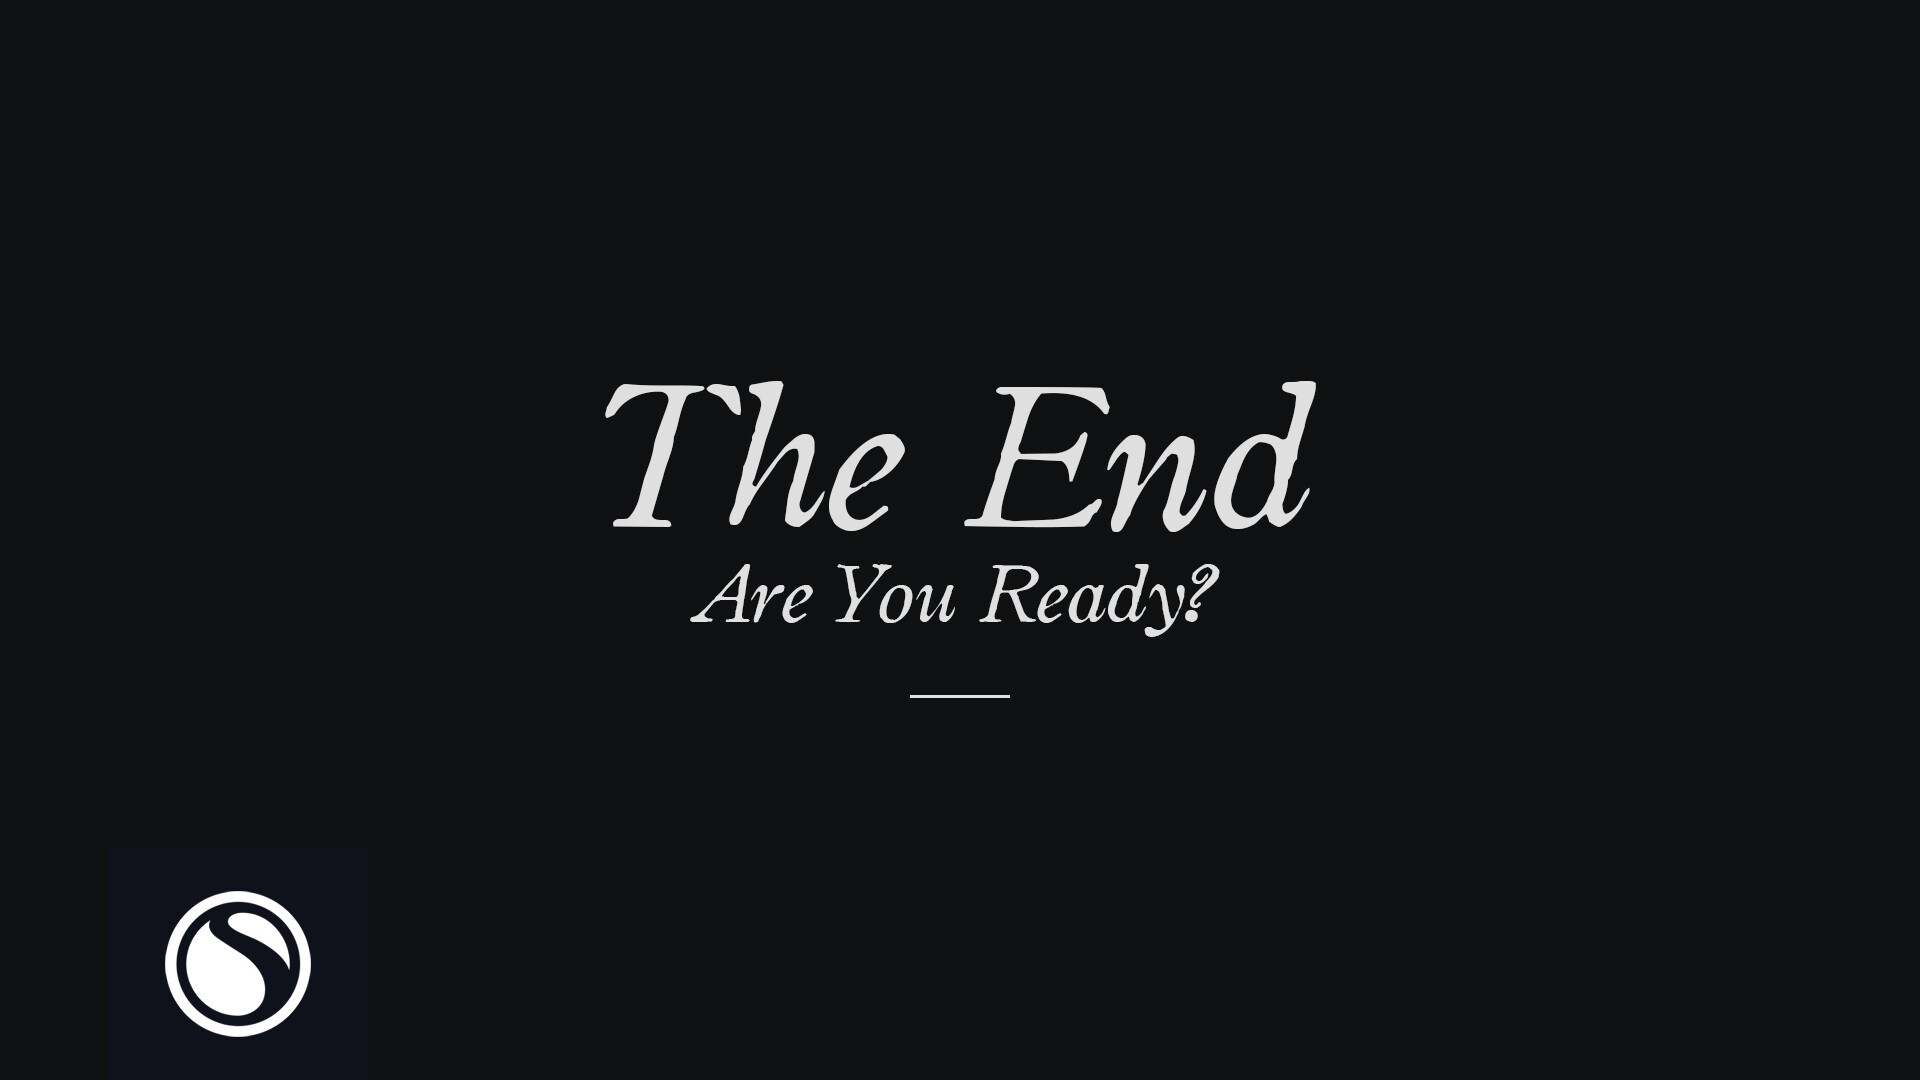 Watch The End - Are You Ready?